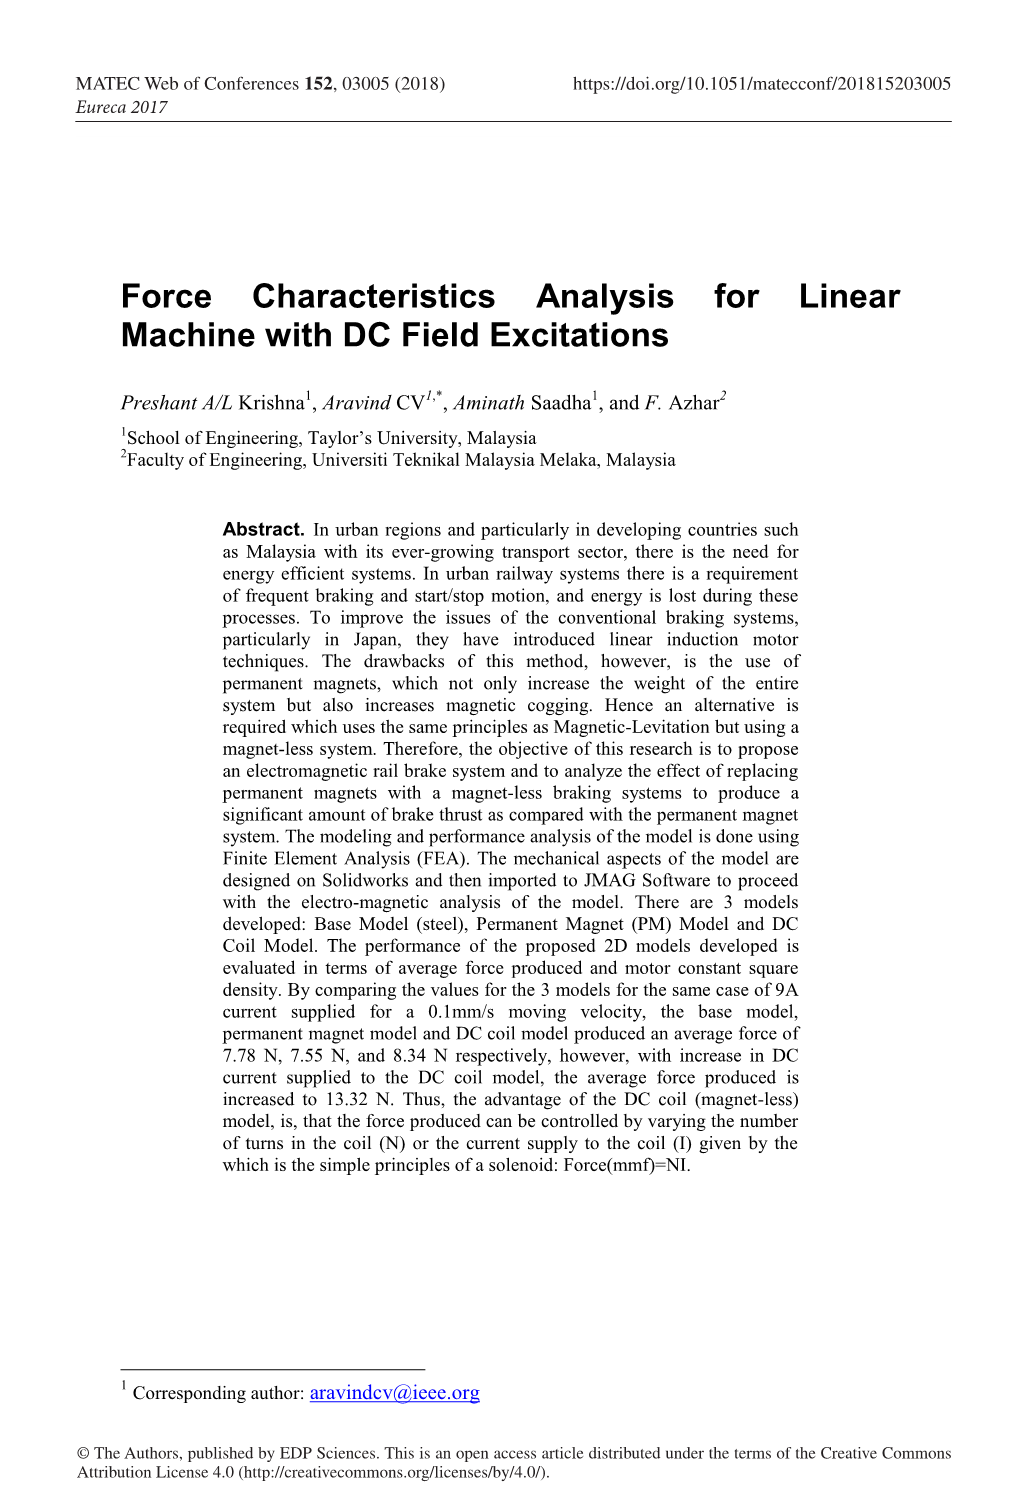 Force Characteristics Analysis for Linear Machine with DC Field Excitations